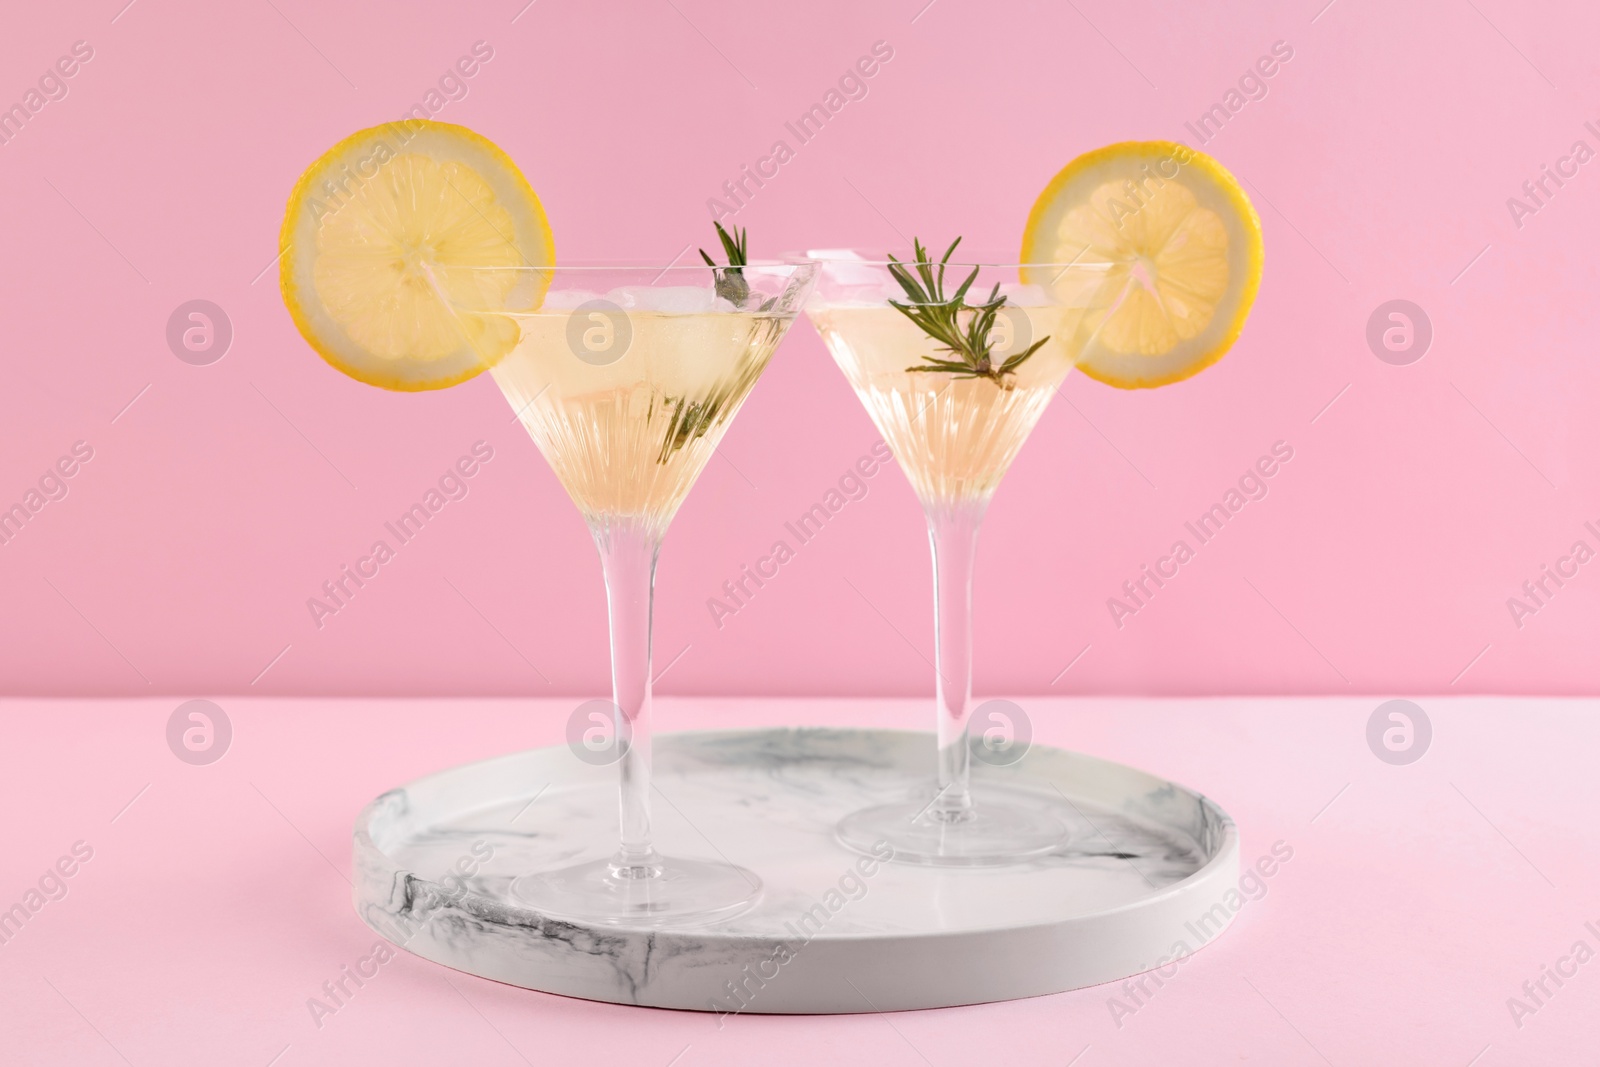 Photo of Martini glasses of cocktail with lemon slices and rosemary on marble tray against pink background